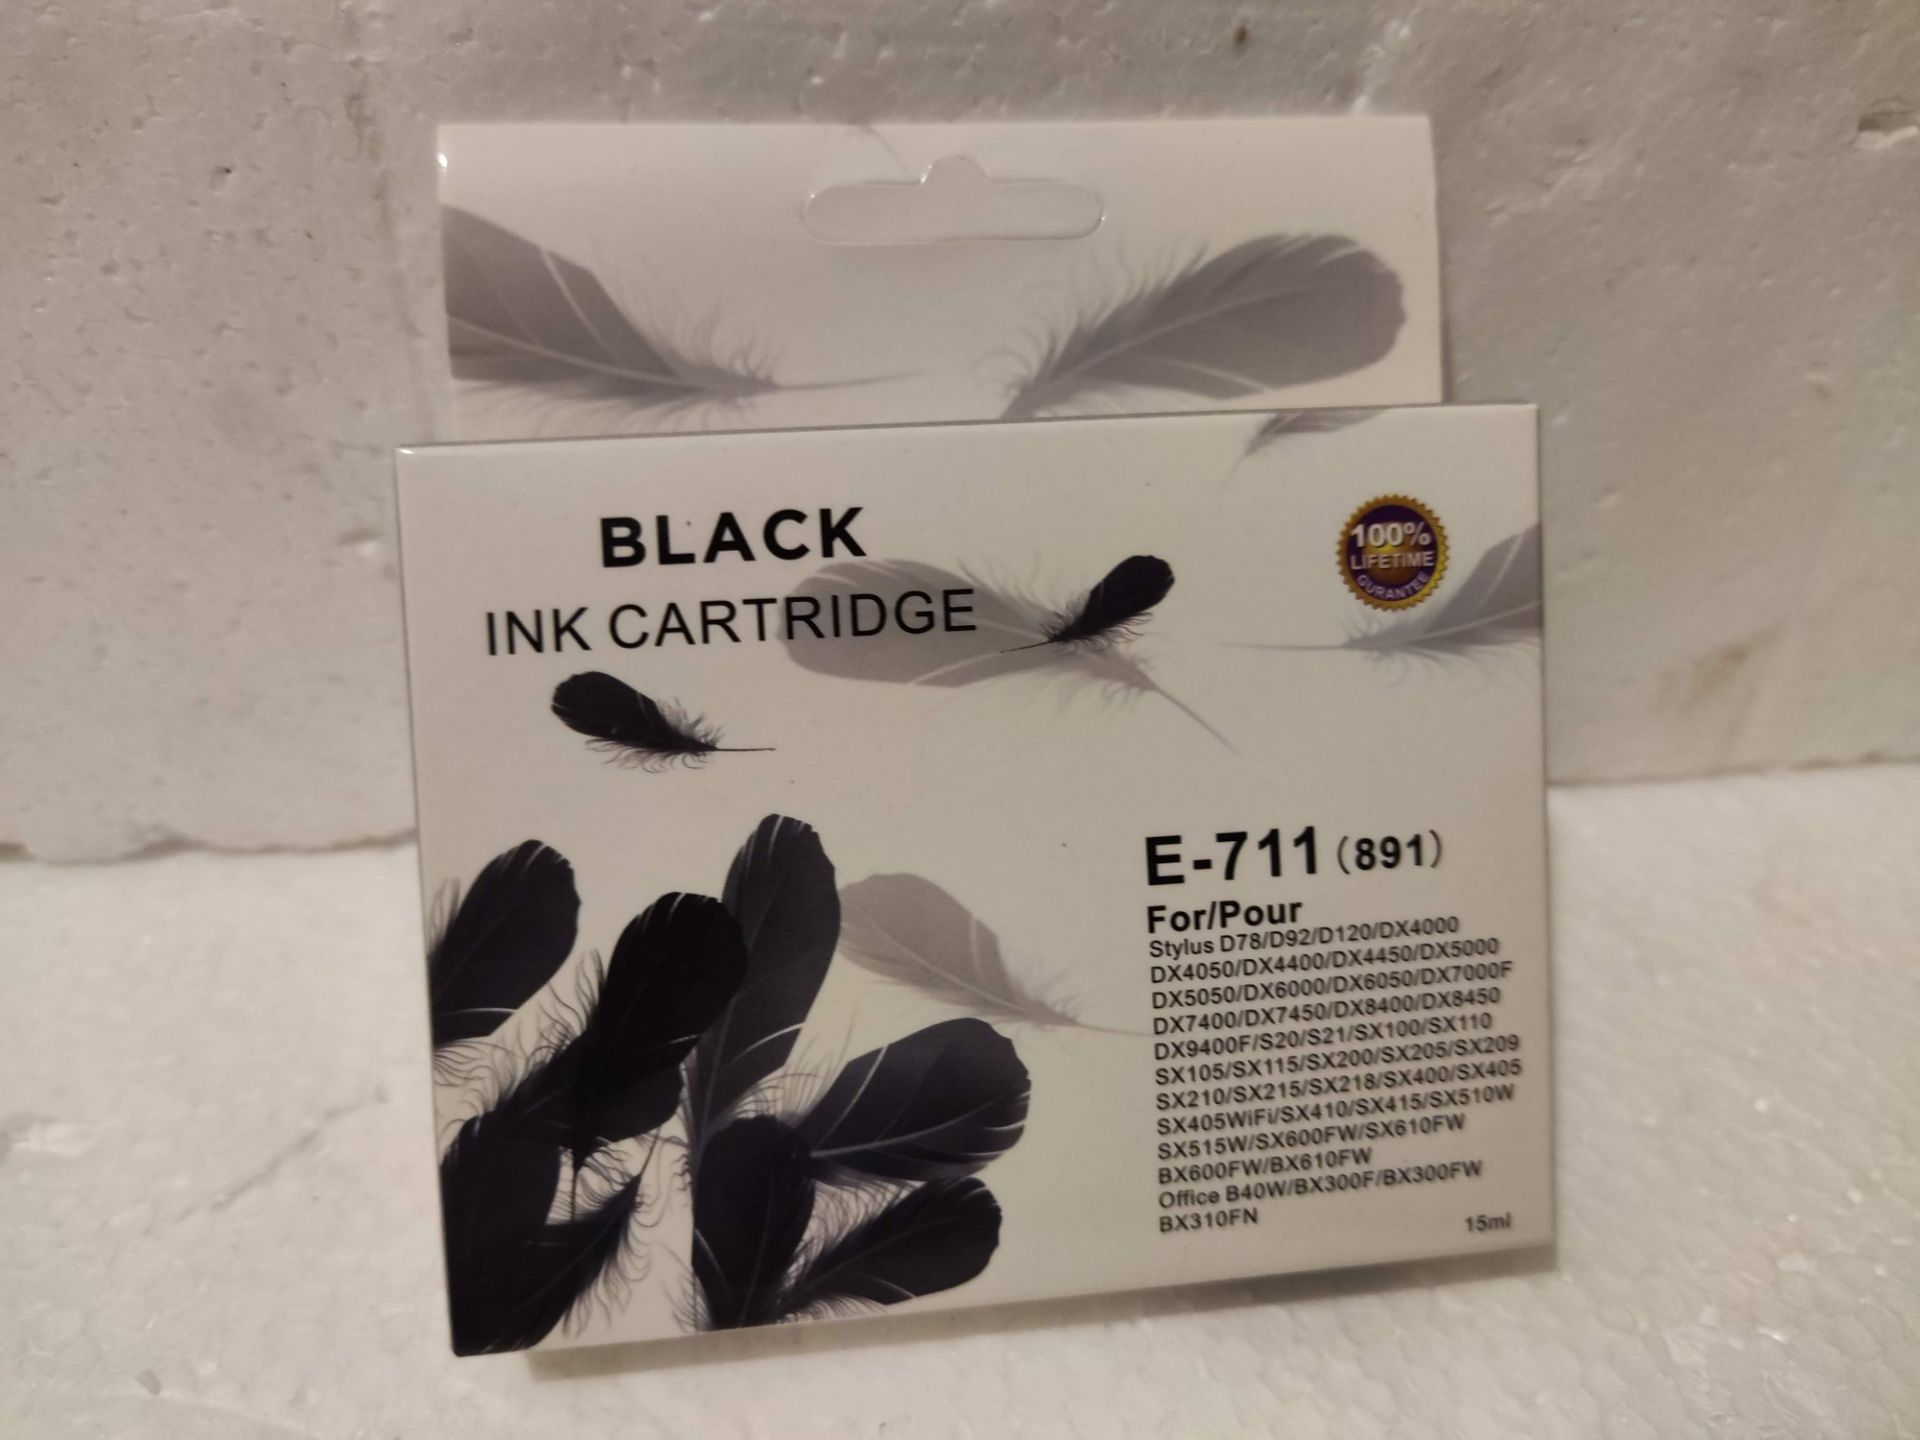 5 Packs of E-711 (891) Ink Cartridge Replacement for Epson T0711 Black.